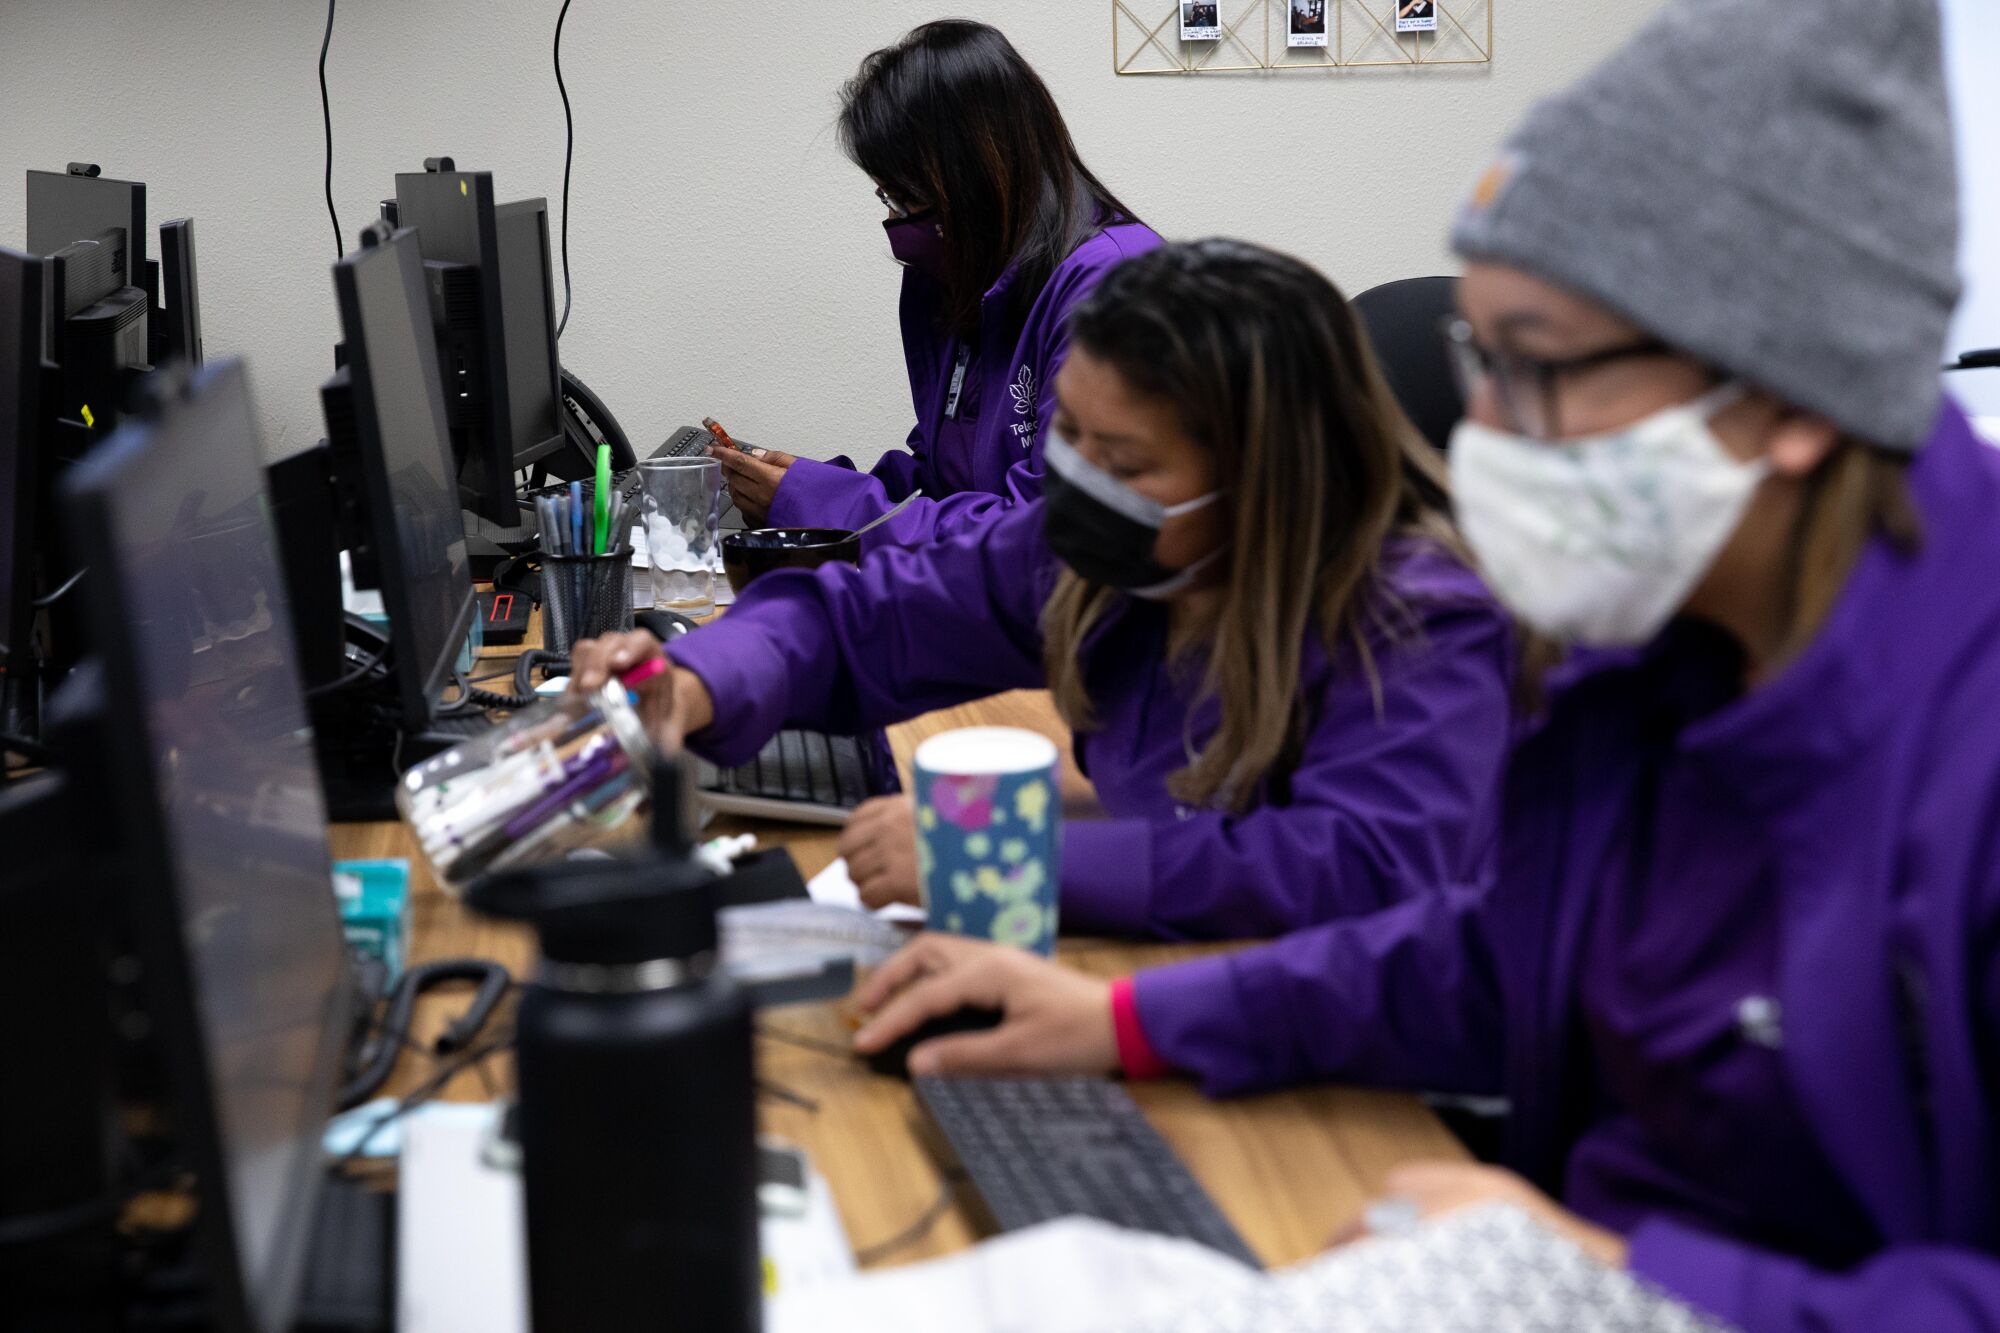 People in purple shirts sit at desks and type on computer keyboards.